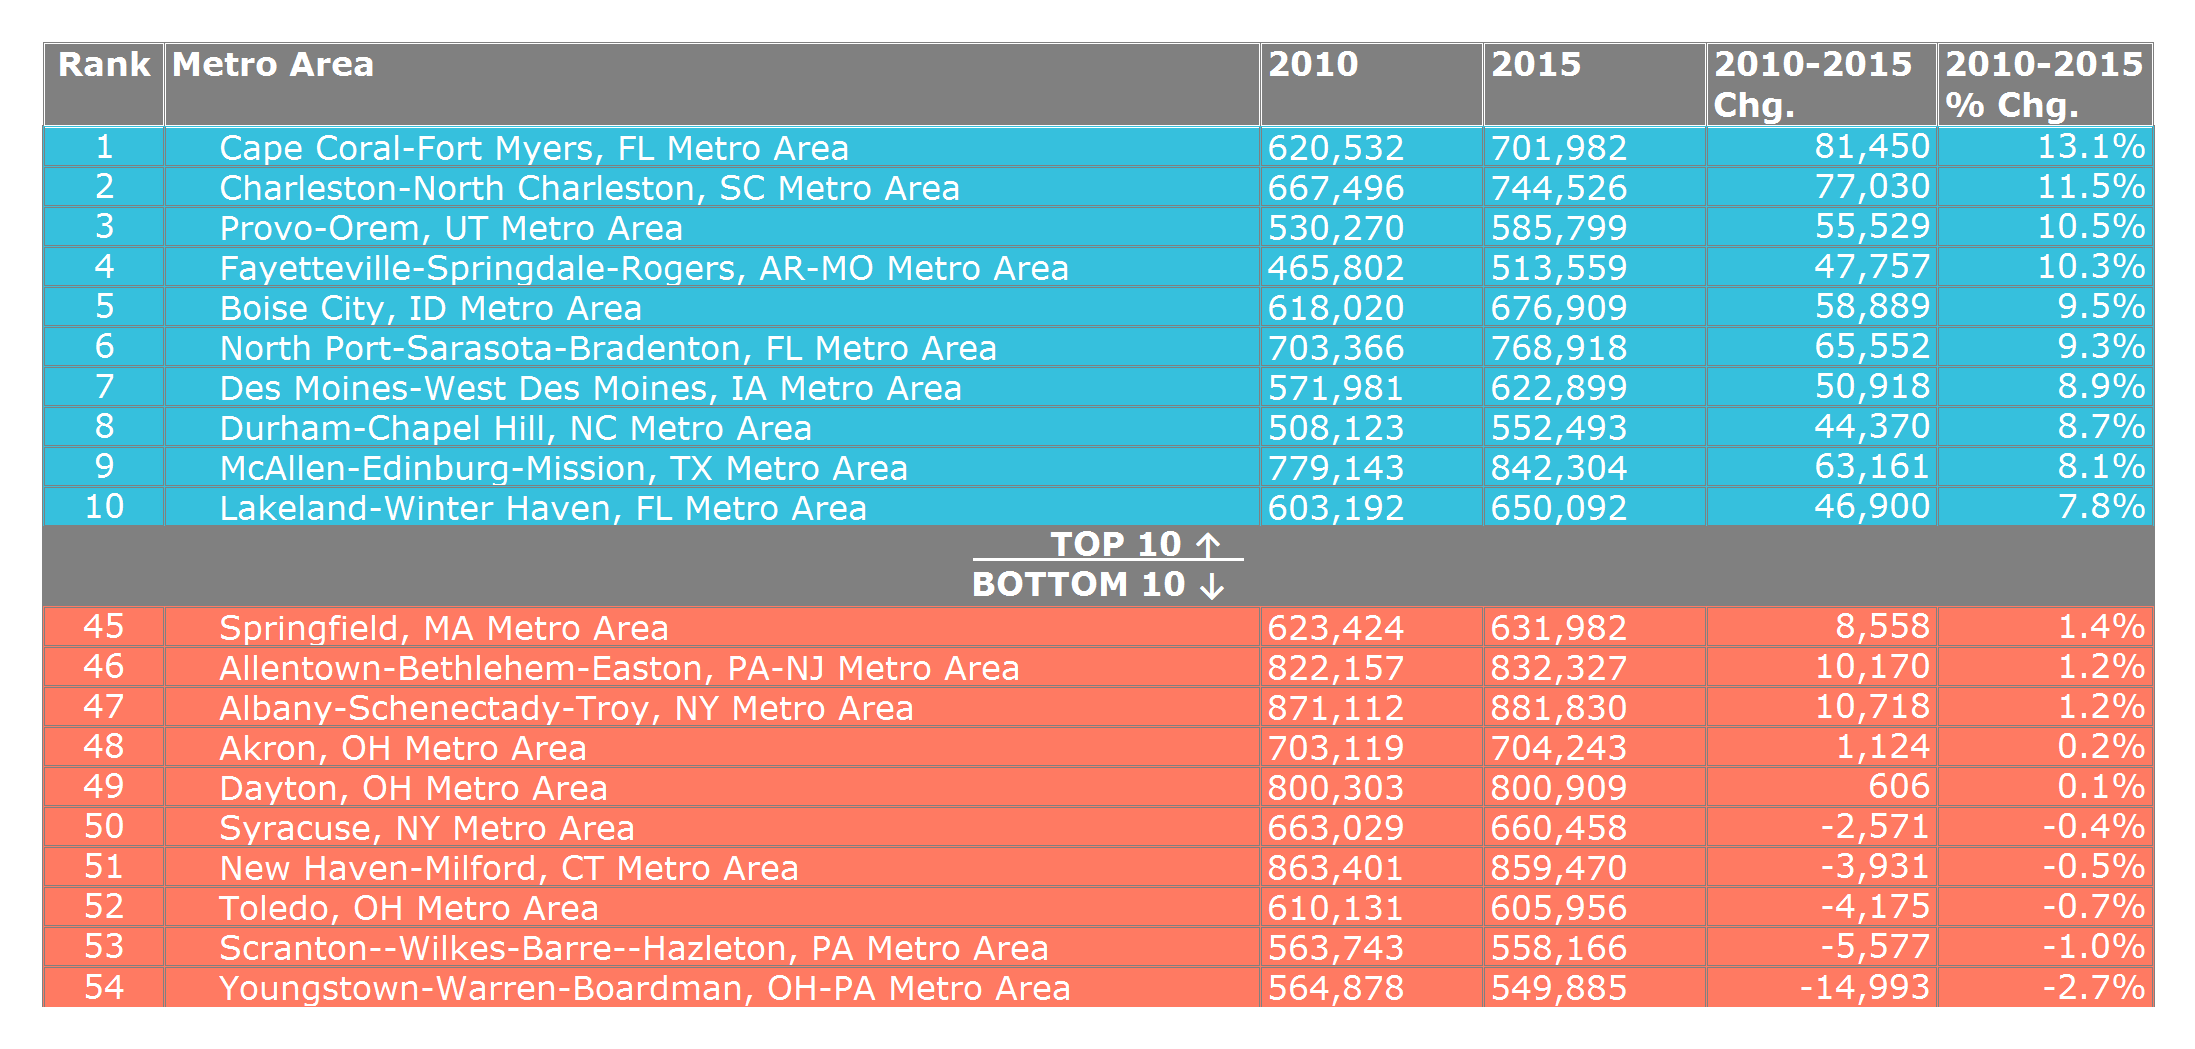 Top 10 & Bottom 10 Mid-Size Metro Areas Ranked by 2010-2015 Population Growth